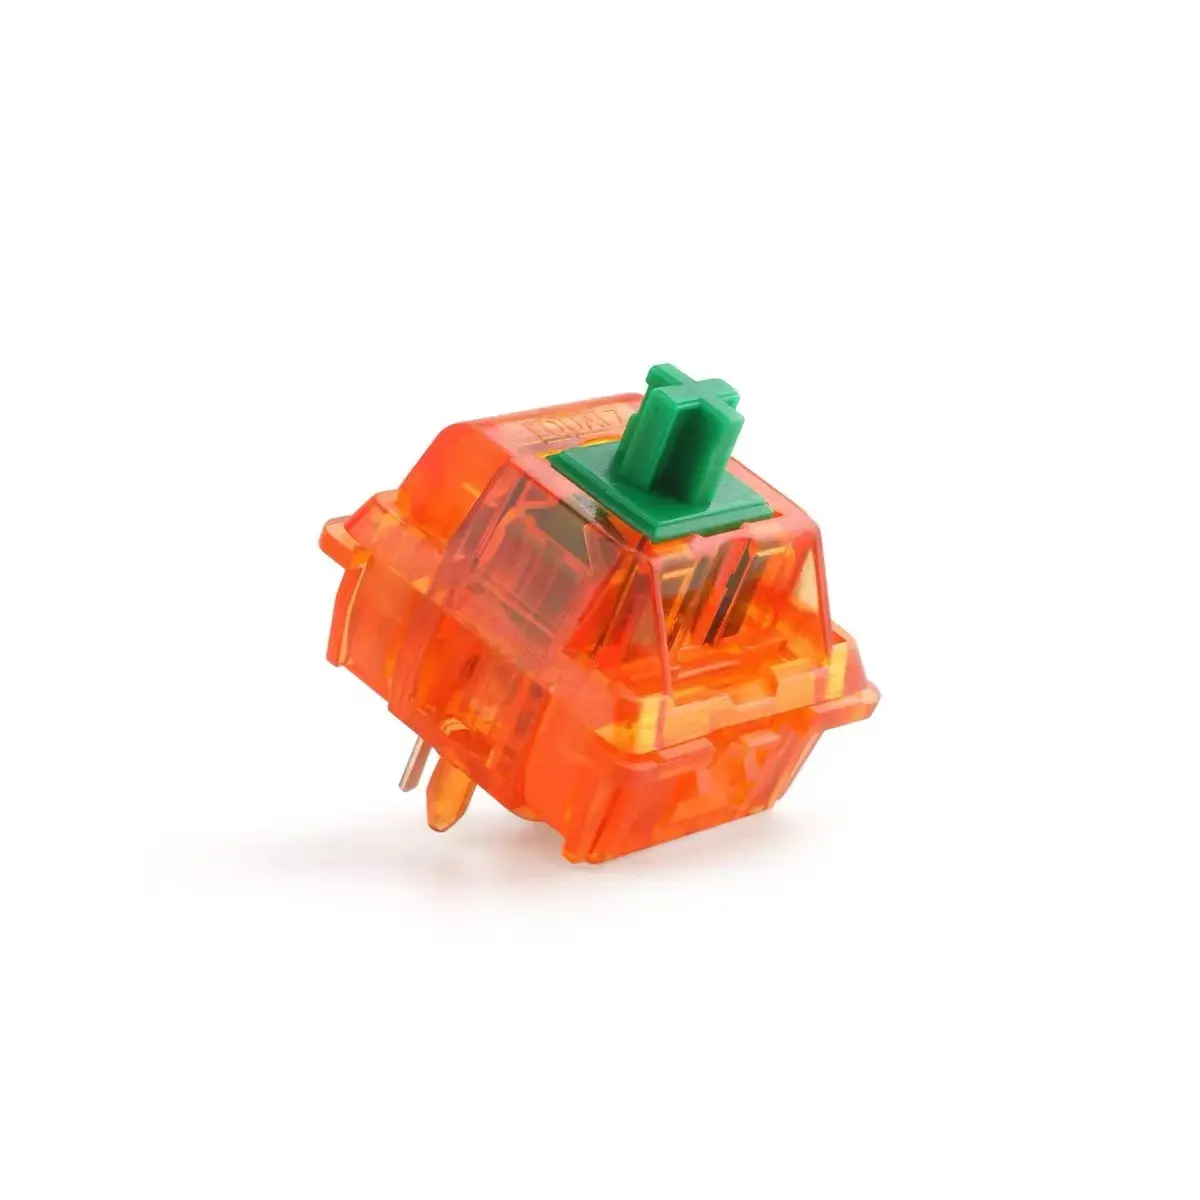 EQUALZ SMD 5 Pin RGB Switches 62g 67g Translucent Linear Keyboard Switches Orange Tangerine Switches